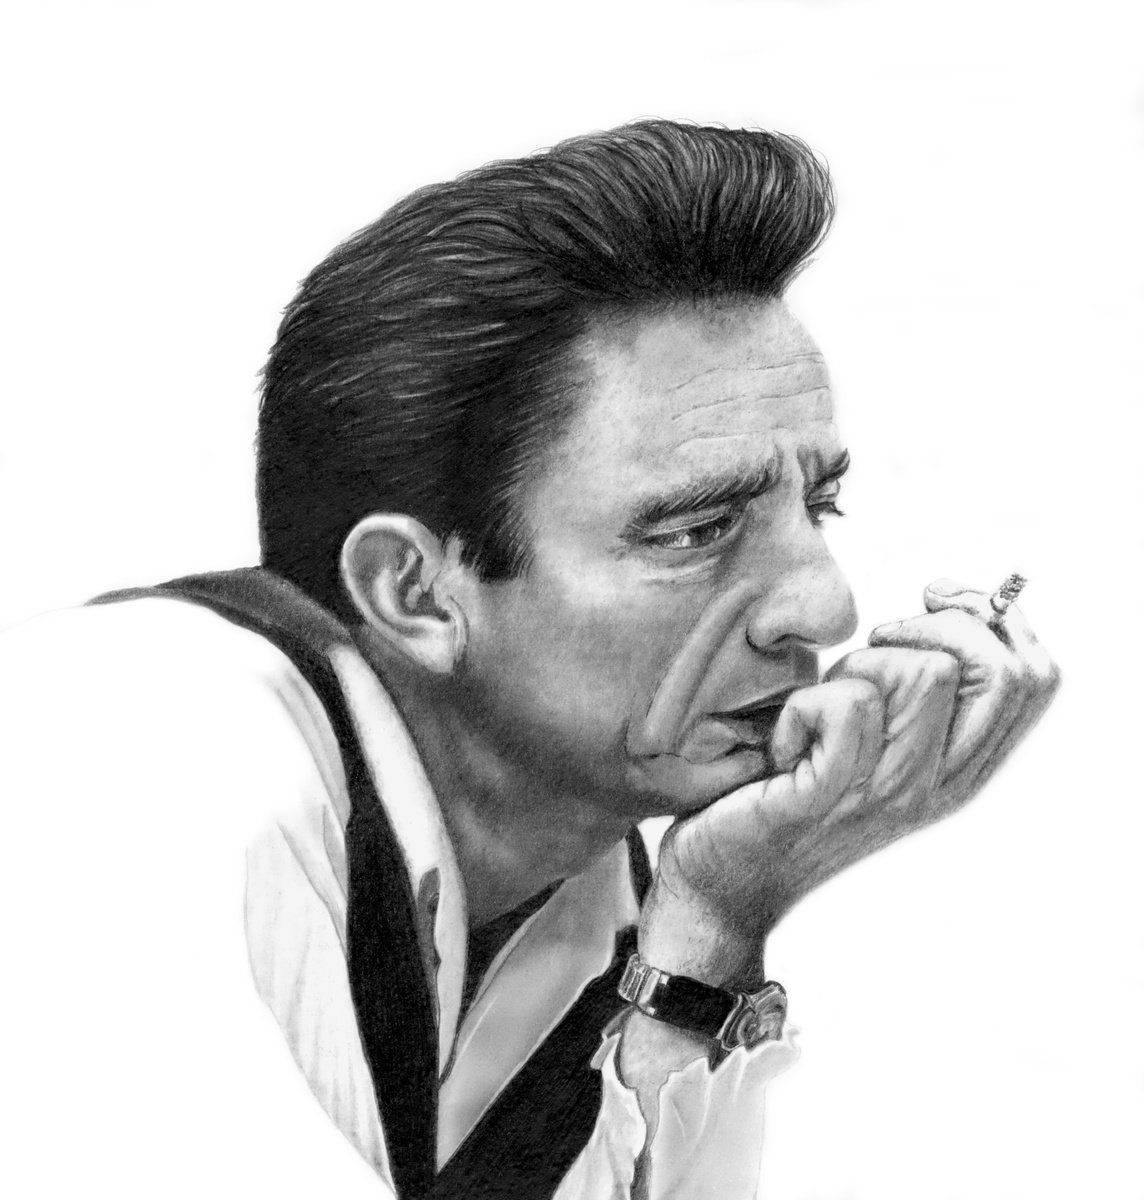 Johnny Cash by Paul Stowe